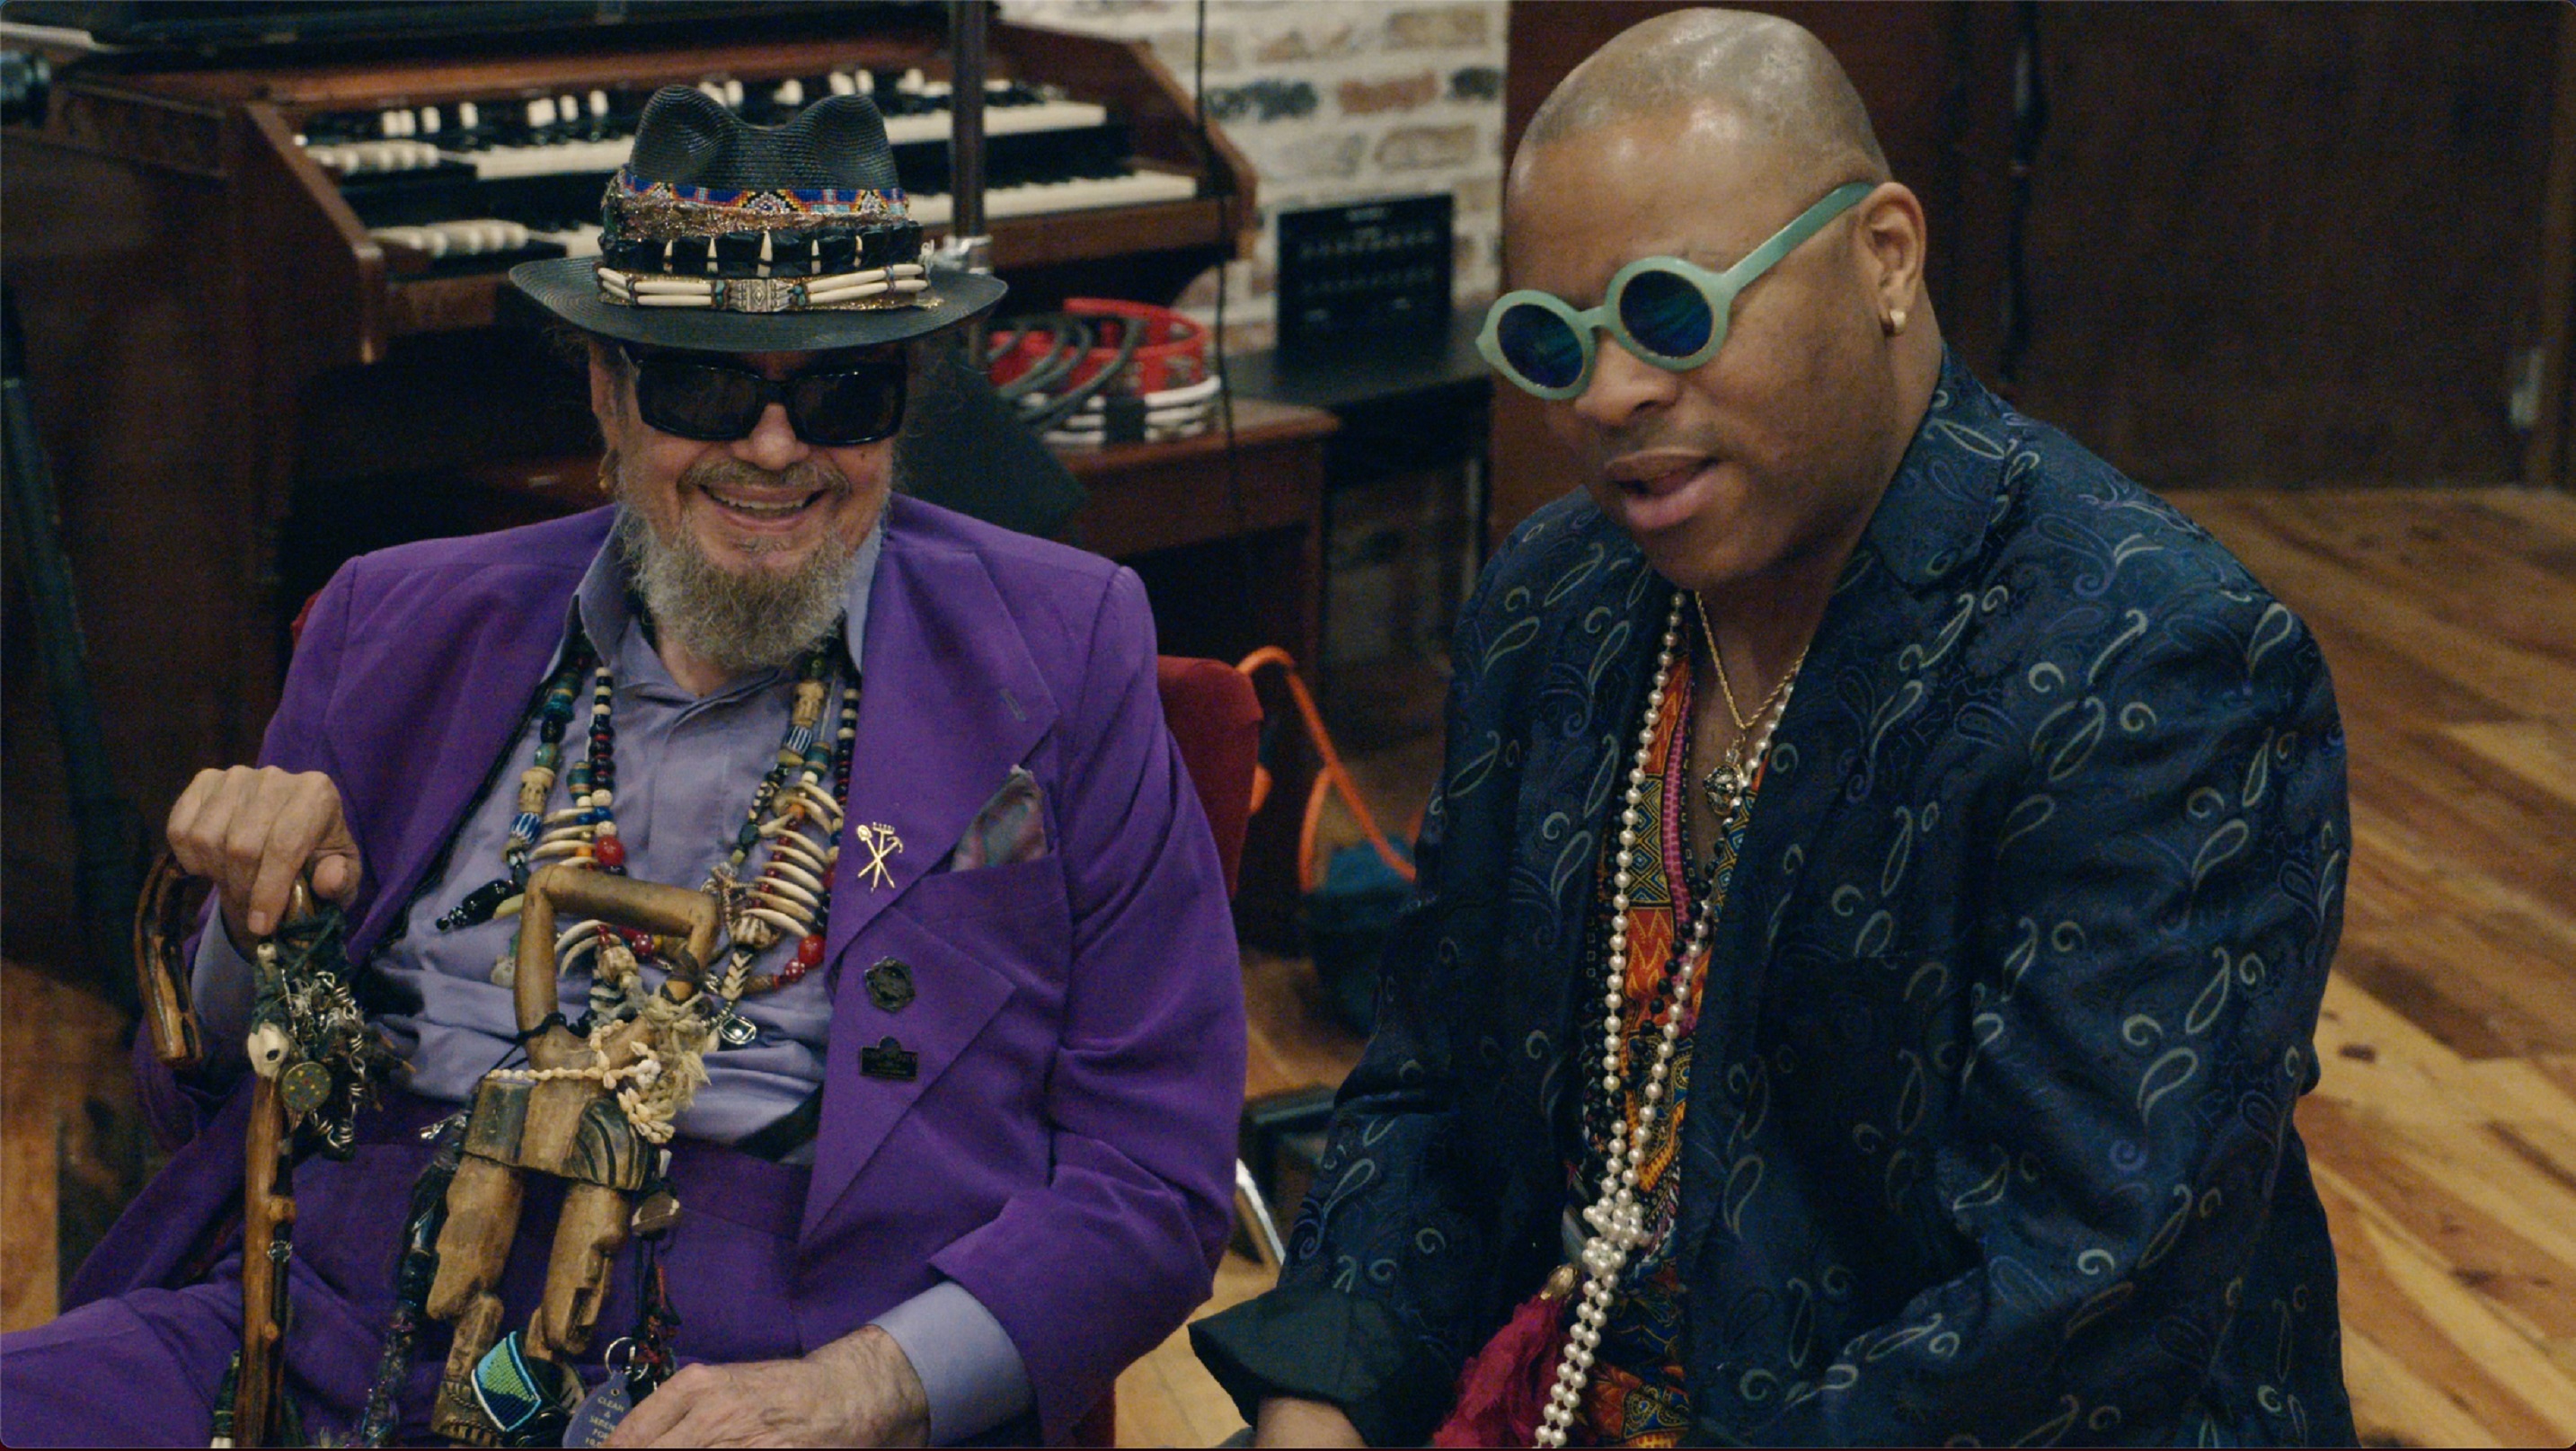 Petaluma Records Releases  Dr. John and Davell Crawford’s “Jock-A-Mo” Video  From Take Me To The River: New Orleans